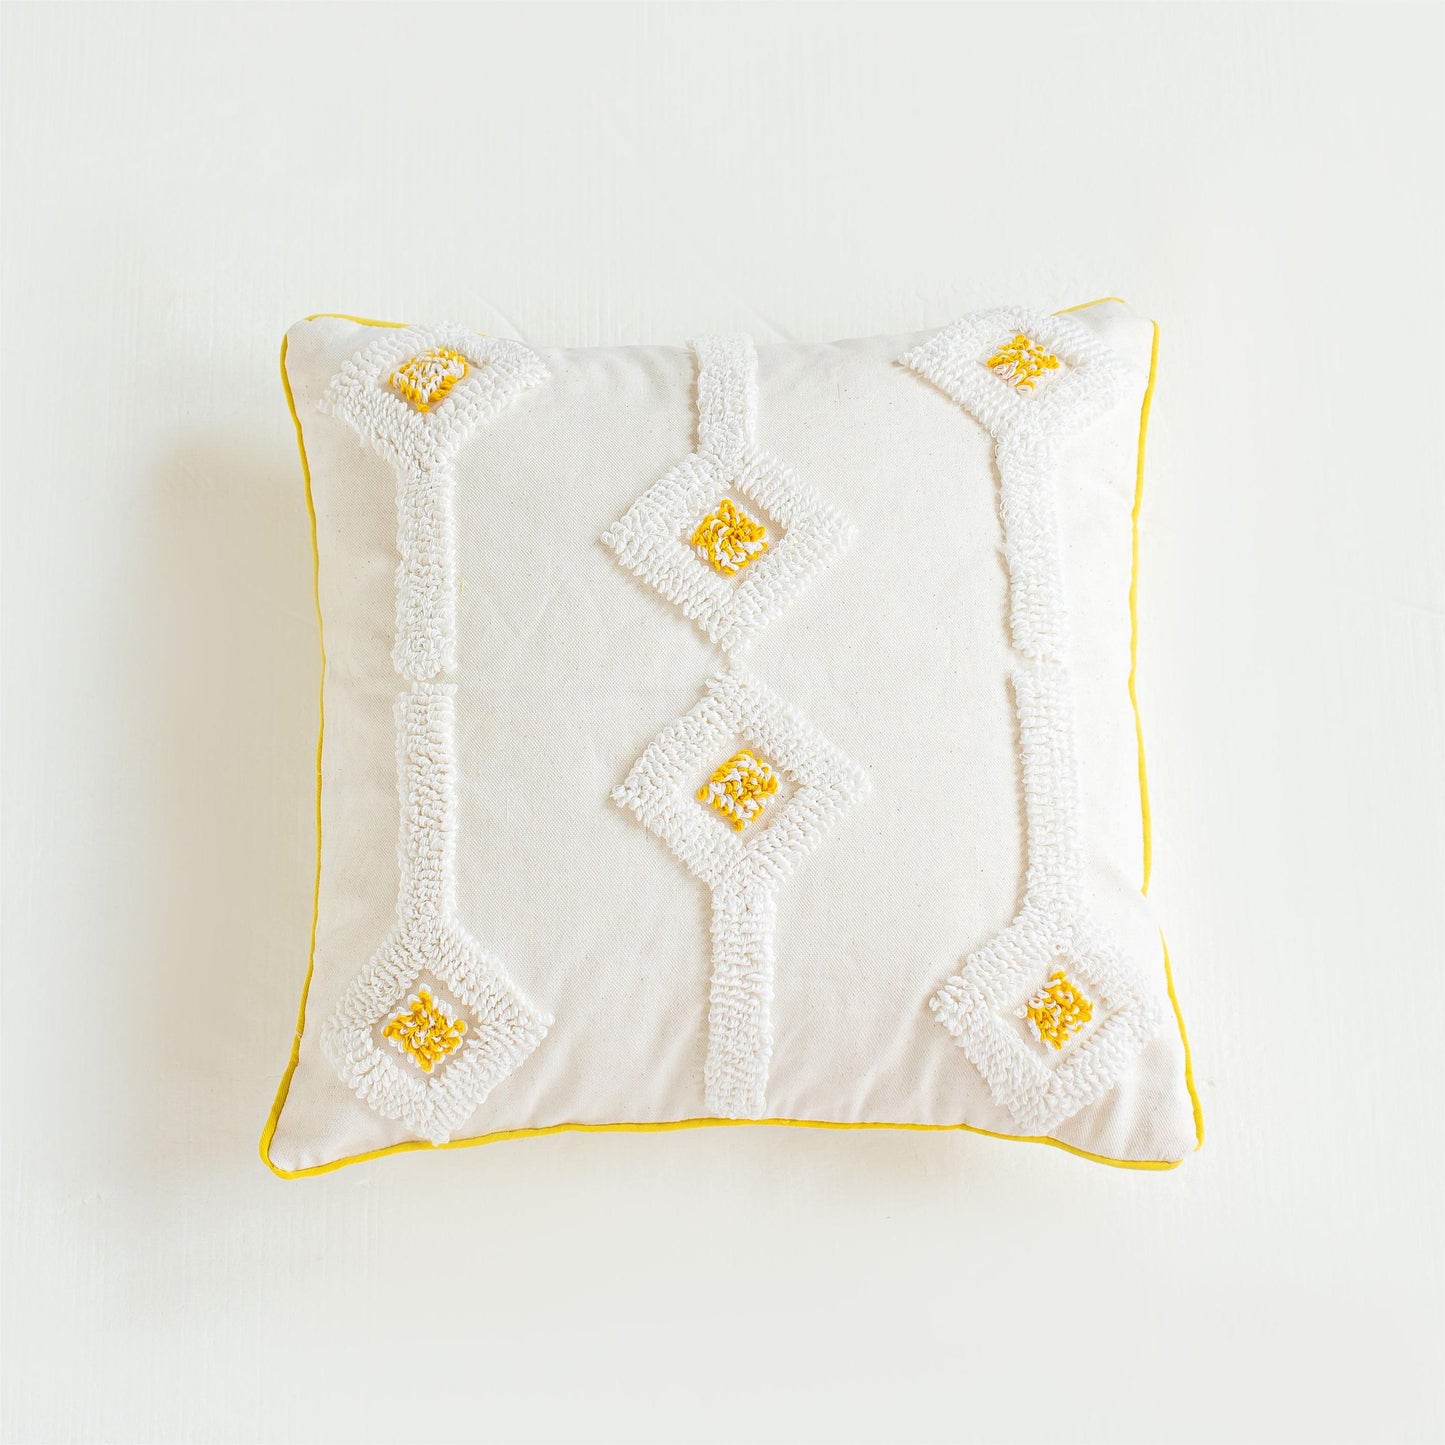 Tufted Pattern Throw Pillow Covers-B